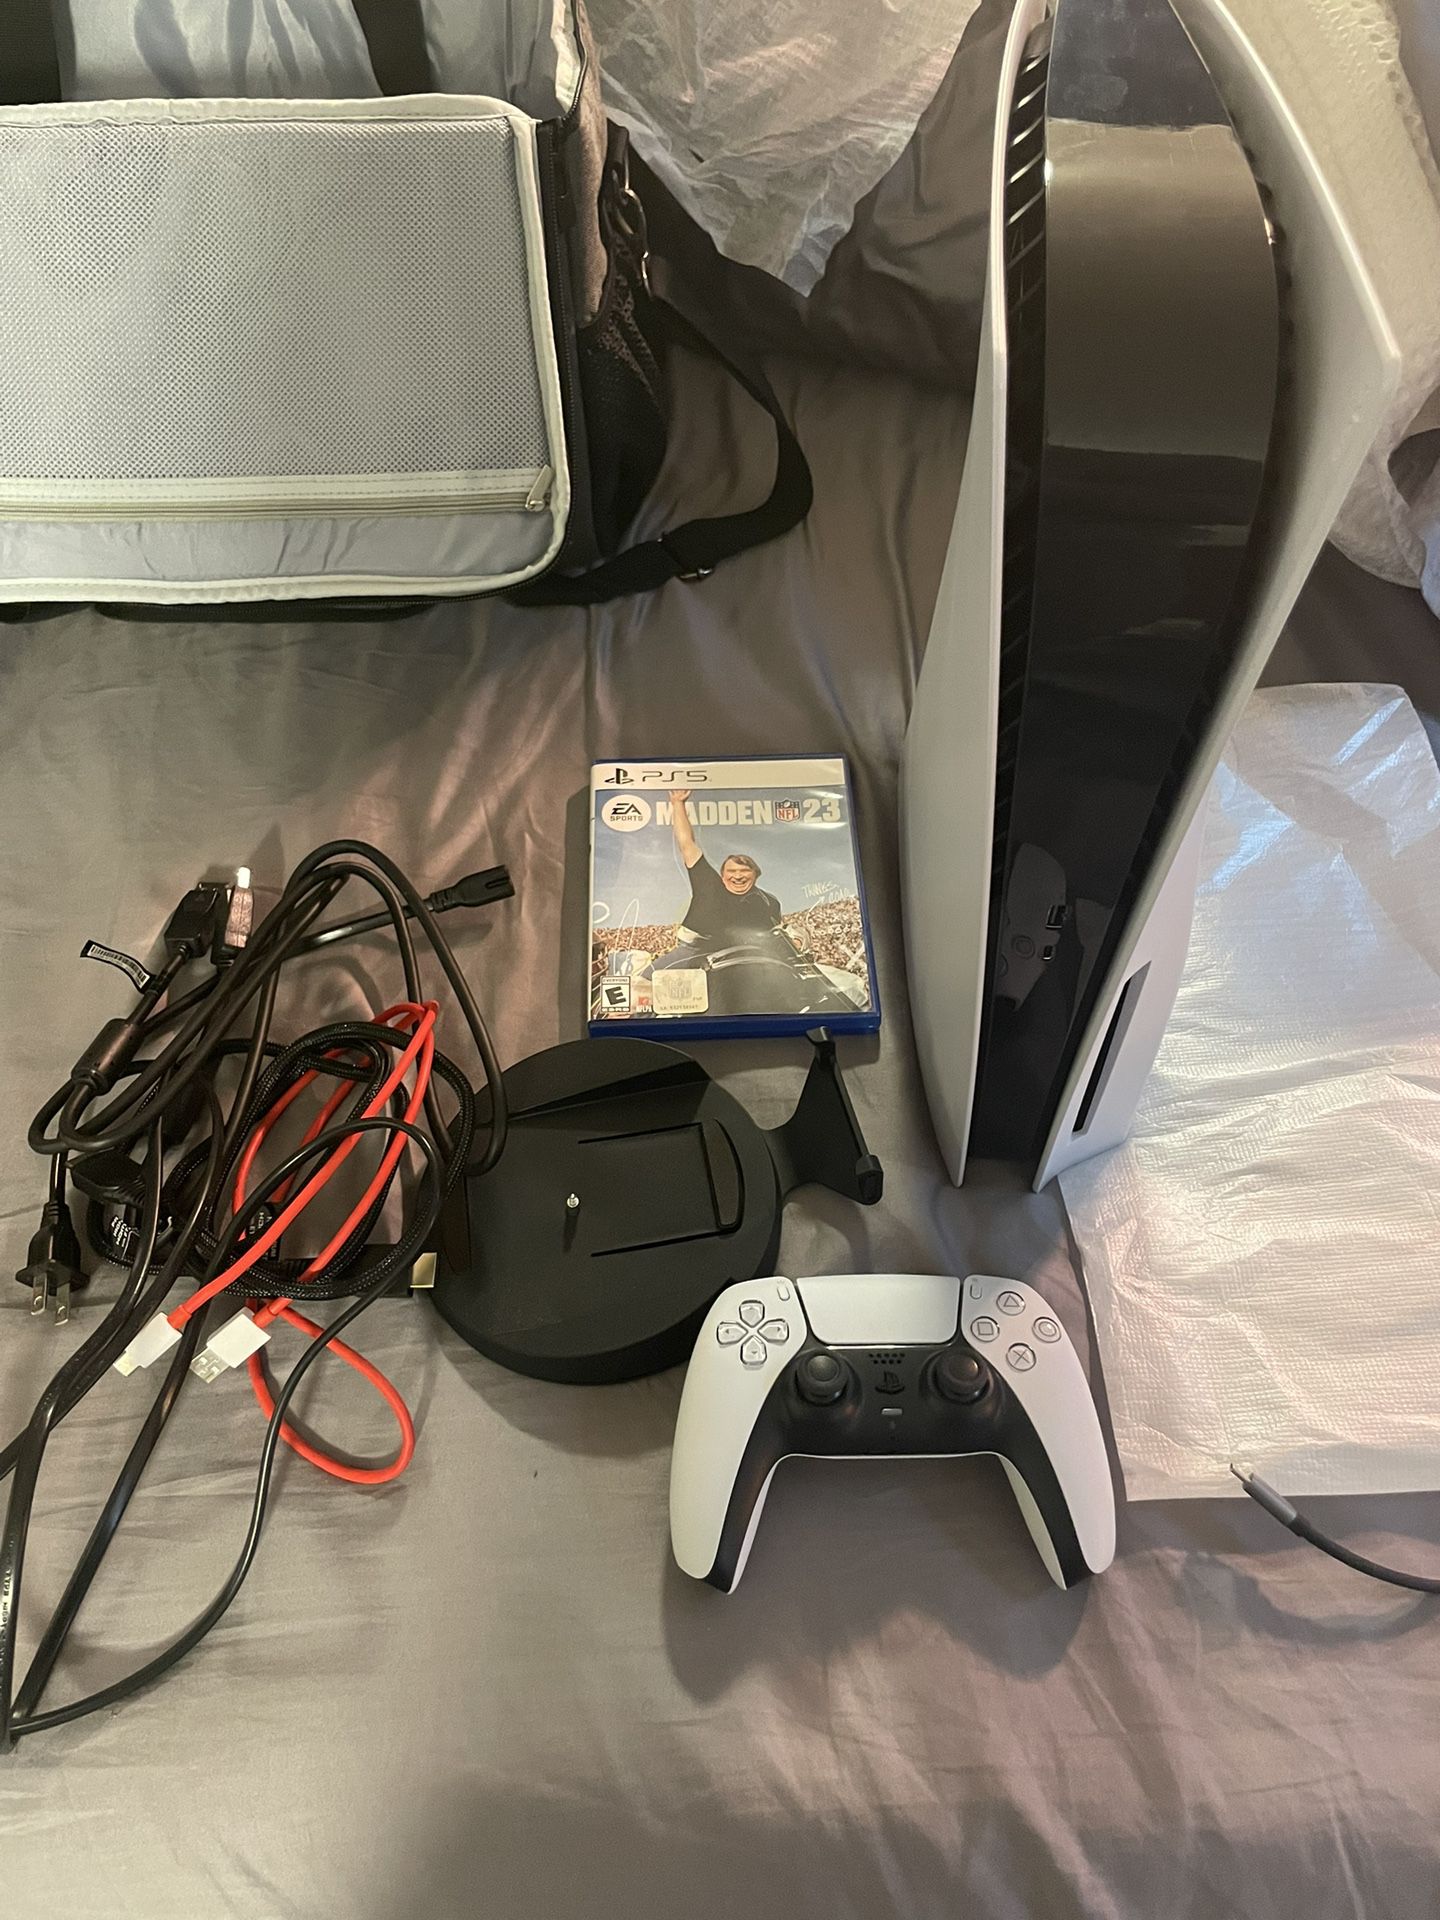 Ps5 Disc Edition With Madden 23 Firm Price for Sale in Seattle, WA